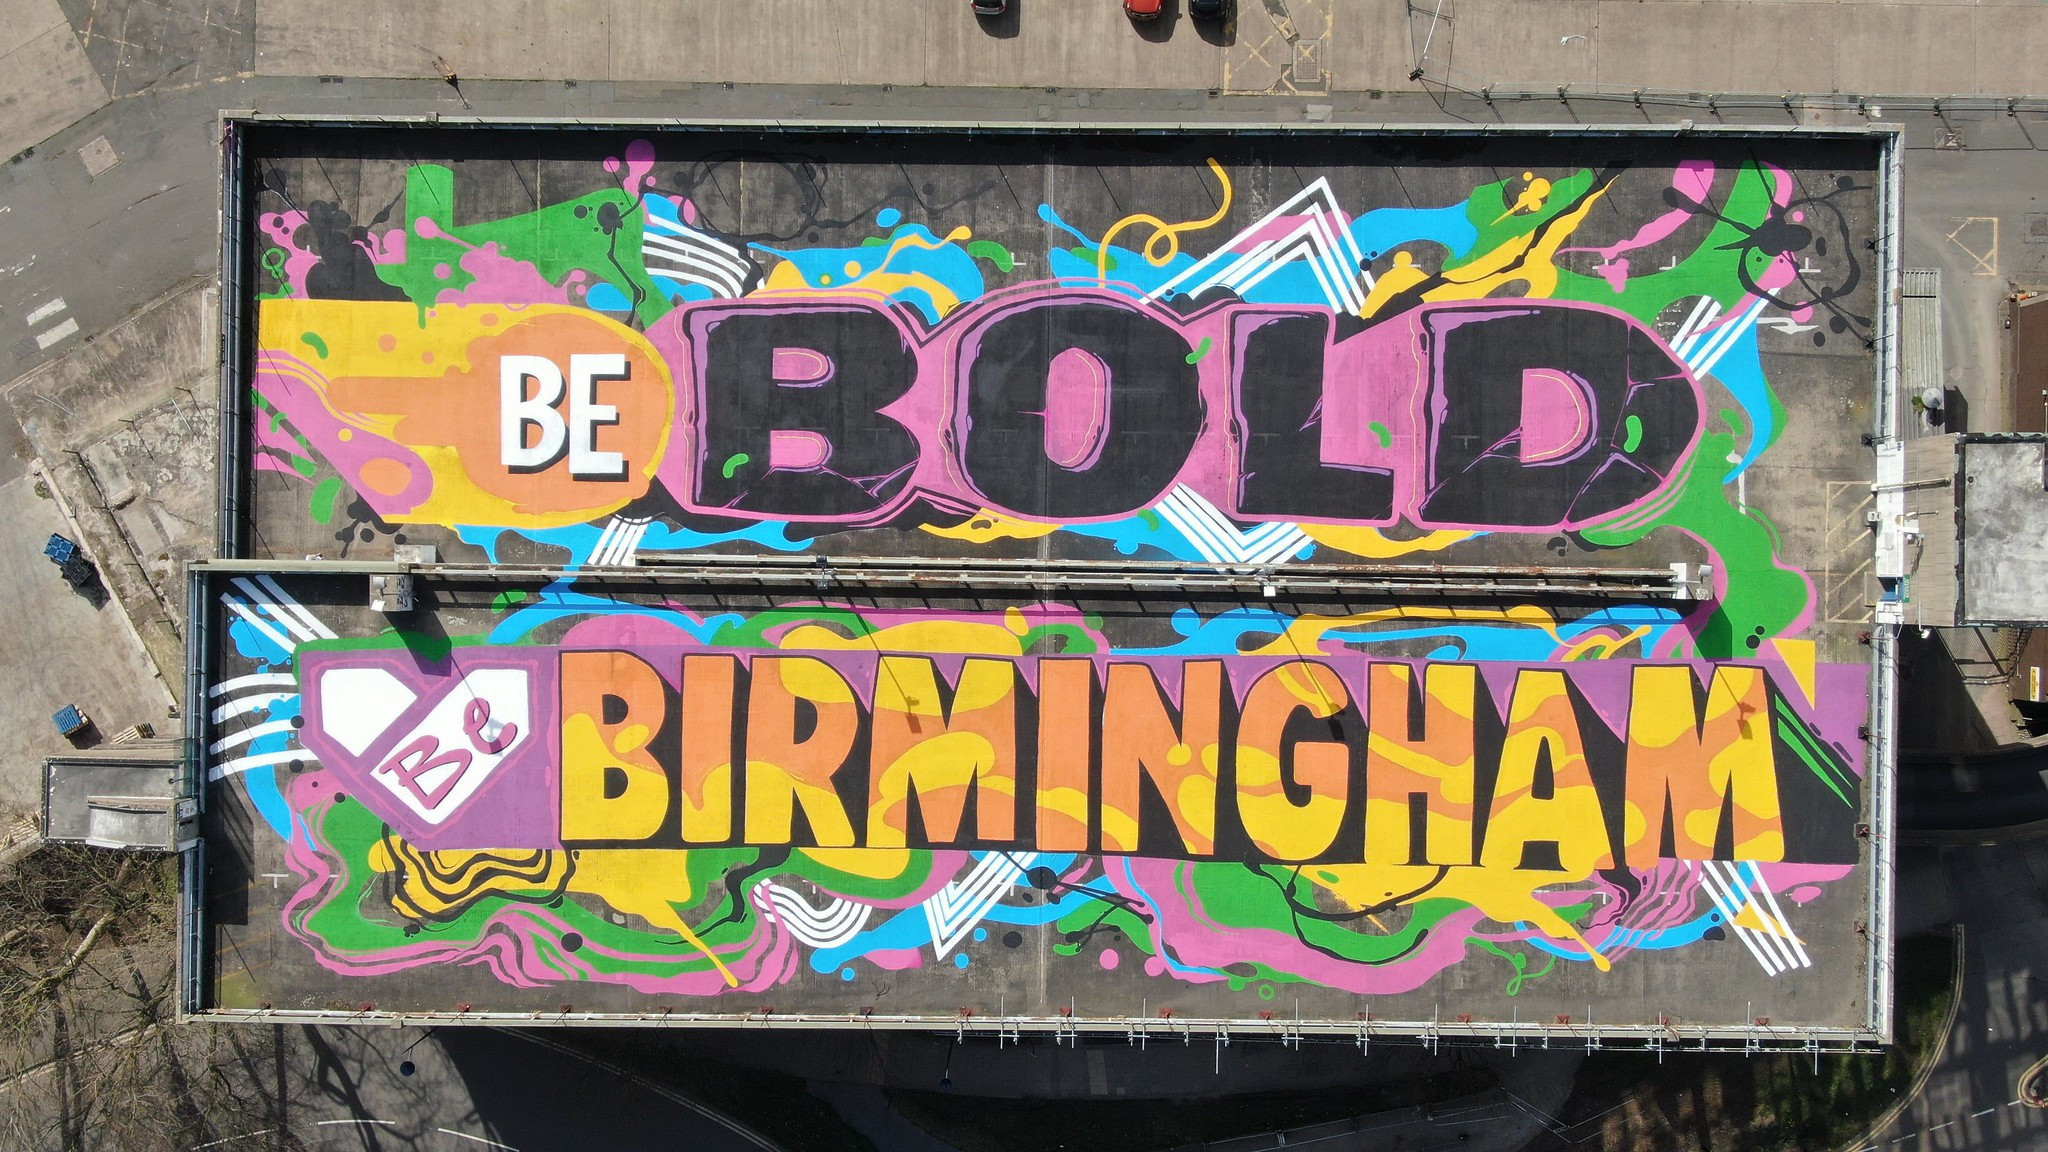 Birmingham is due to stage the Commonwealth Games from July 28 to August 8 this year ©Birmingham City Council